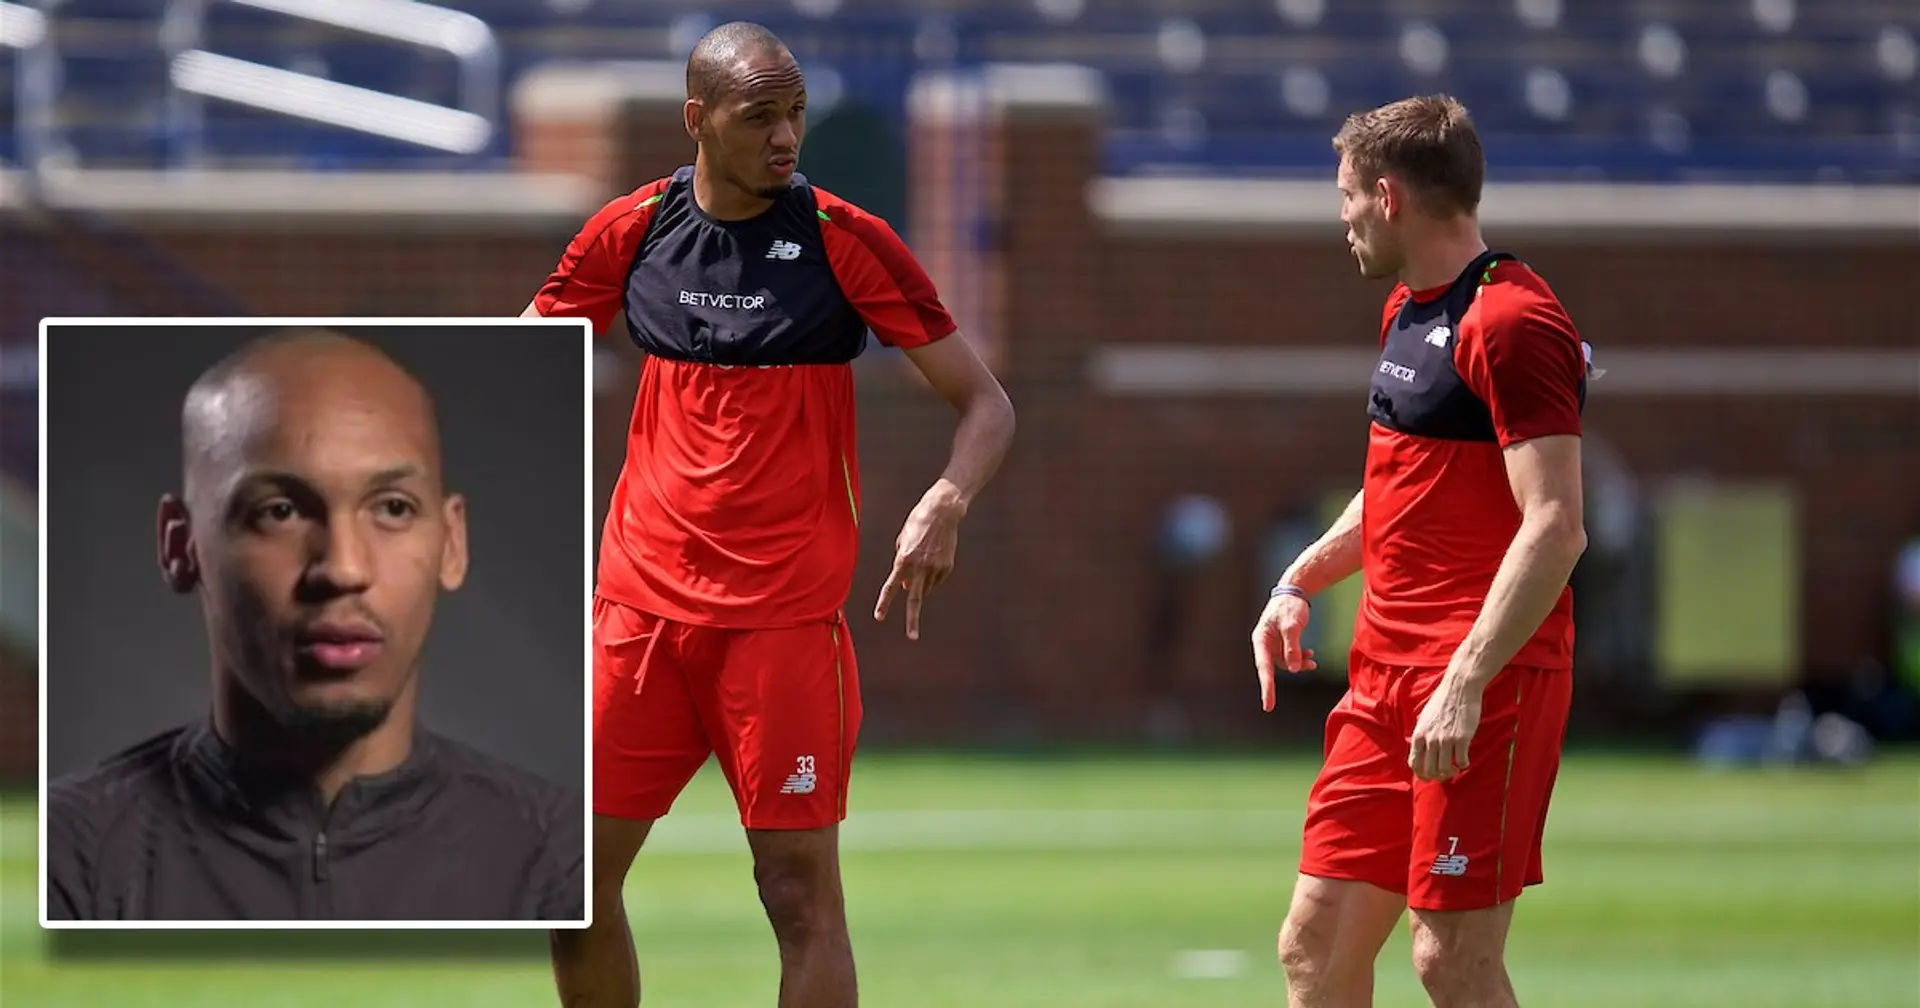 'He didn't care I was fighting for a position with him': Fabinho reveals how Milner helped him adapt at Liverpool